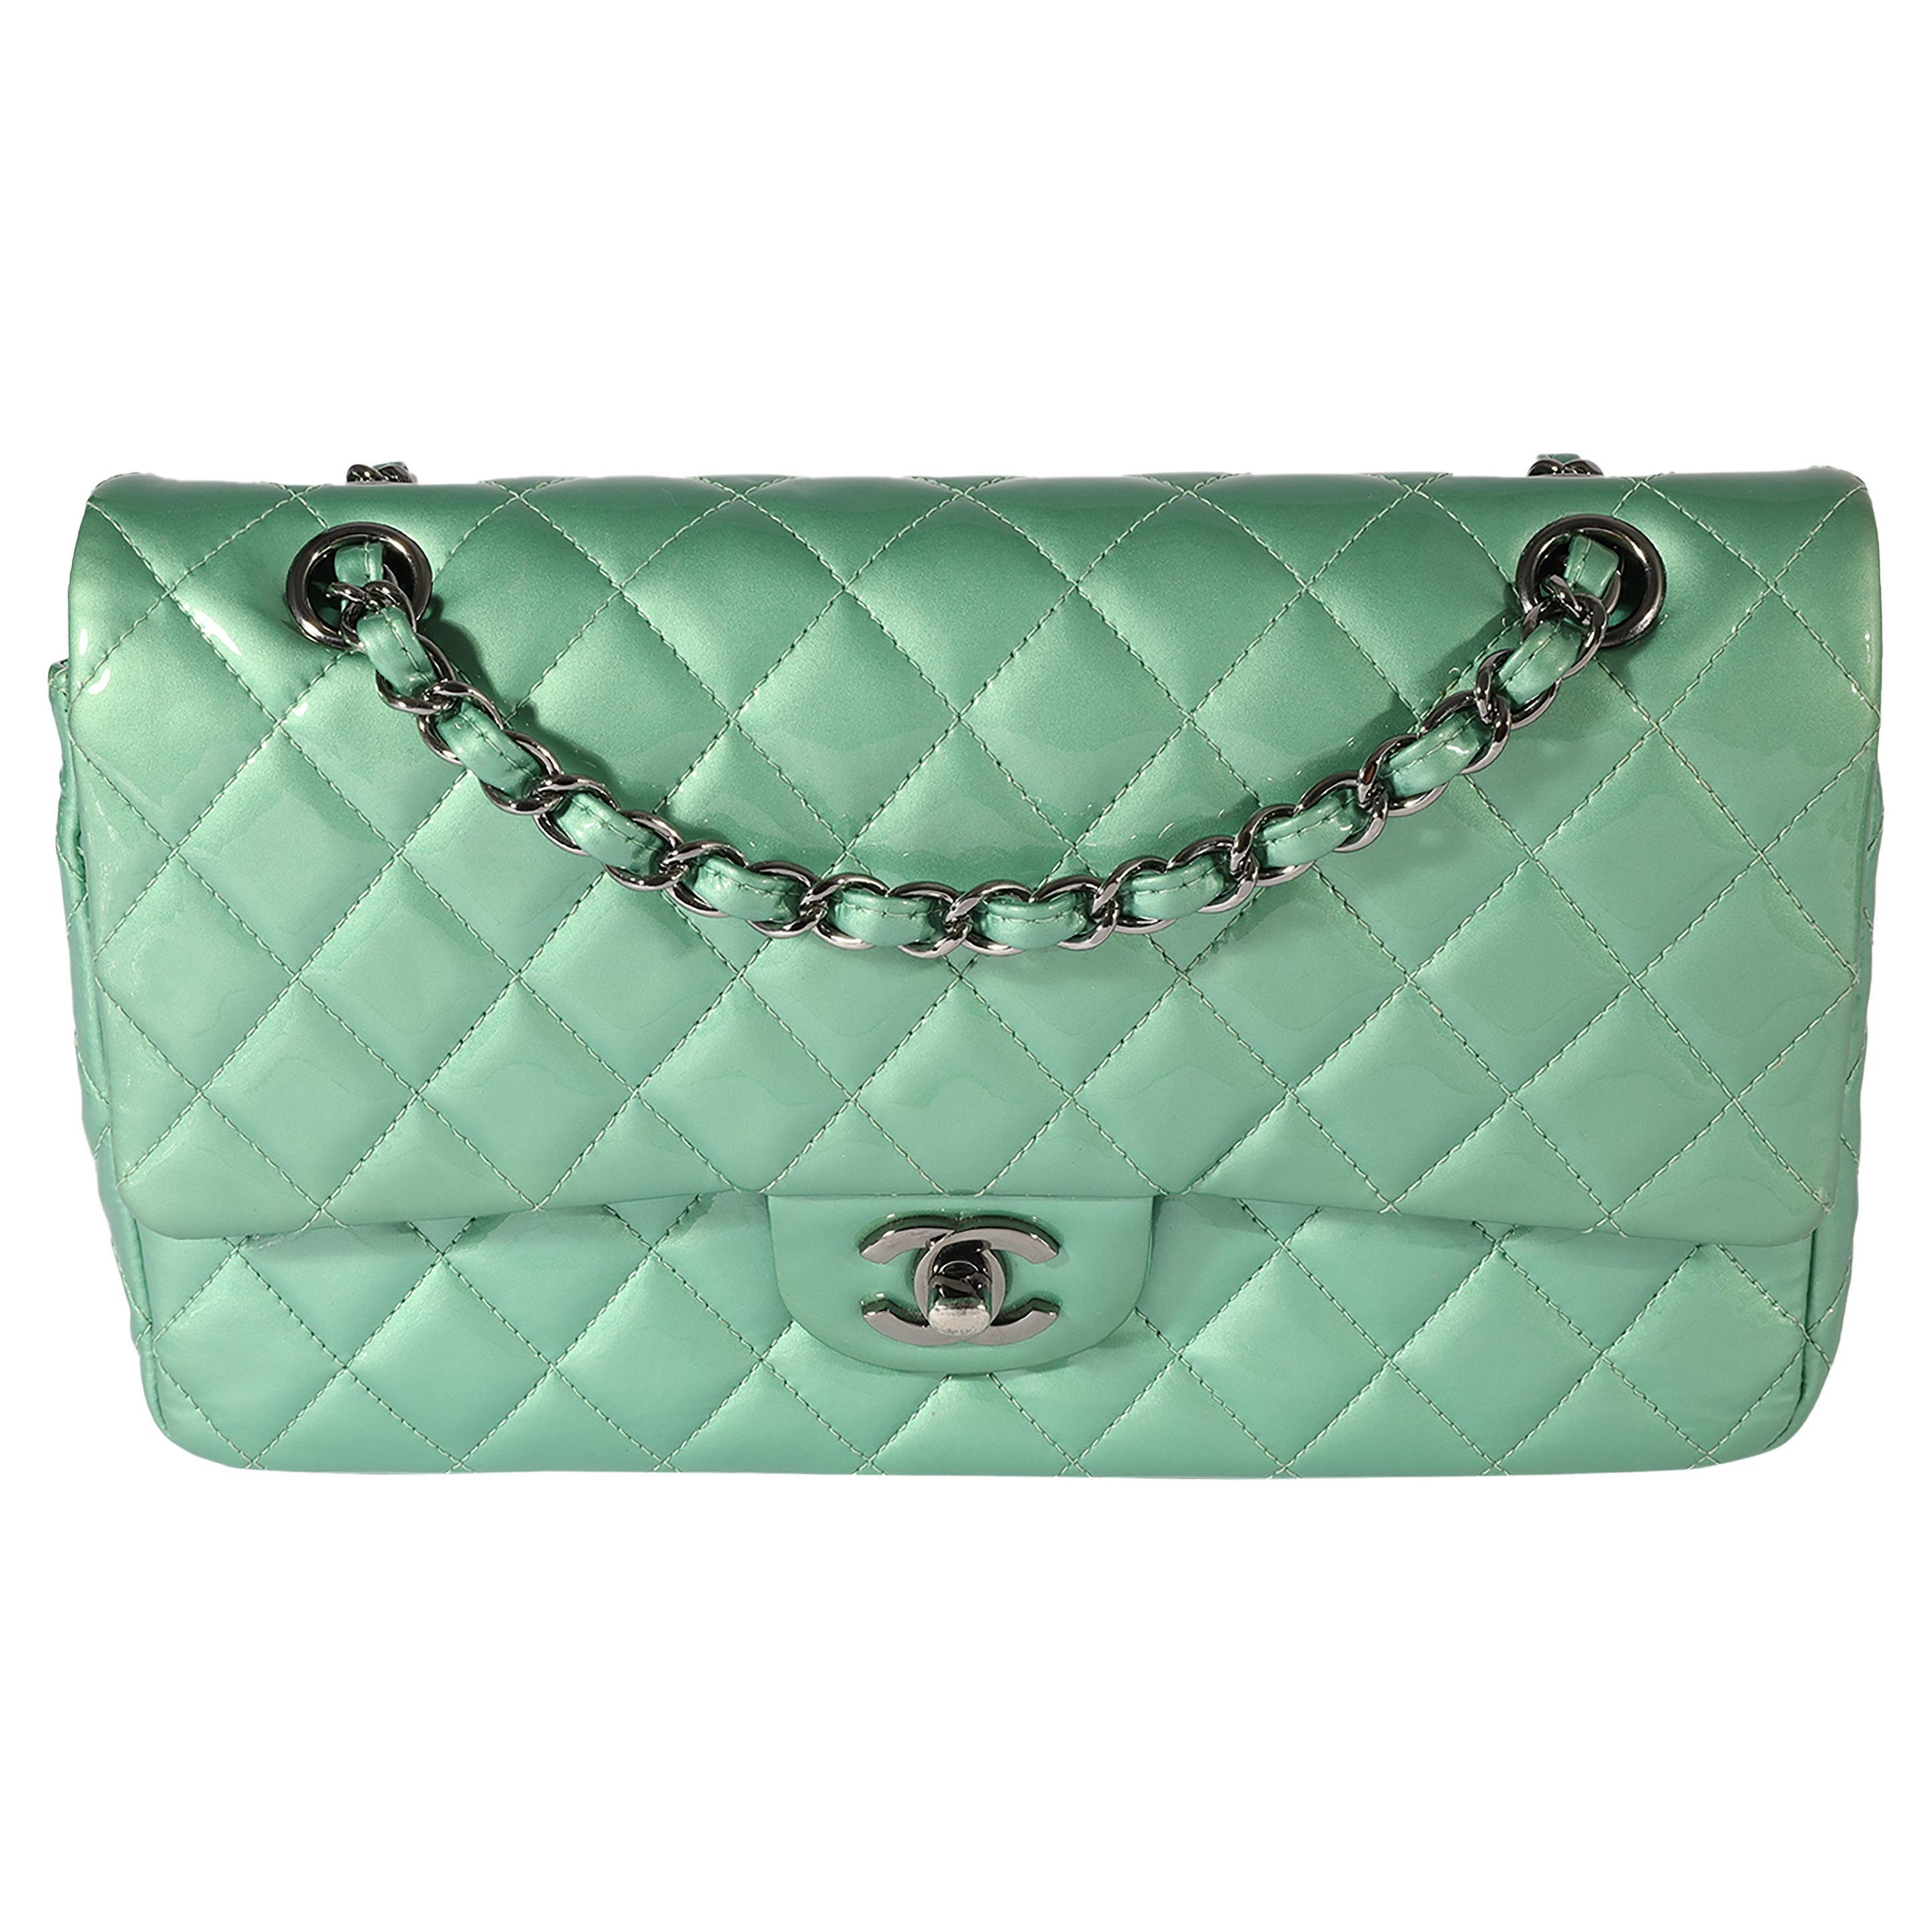 Chanel Seafoam Quilted Patent Leather Medium Classic Double Flap Bag